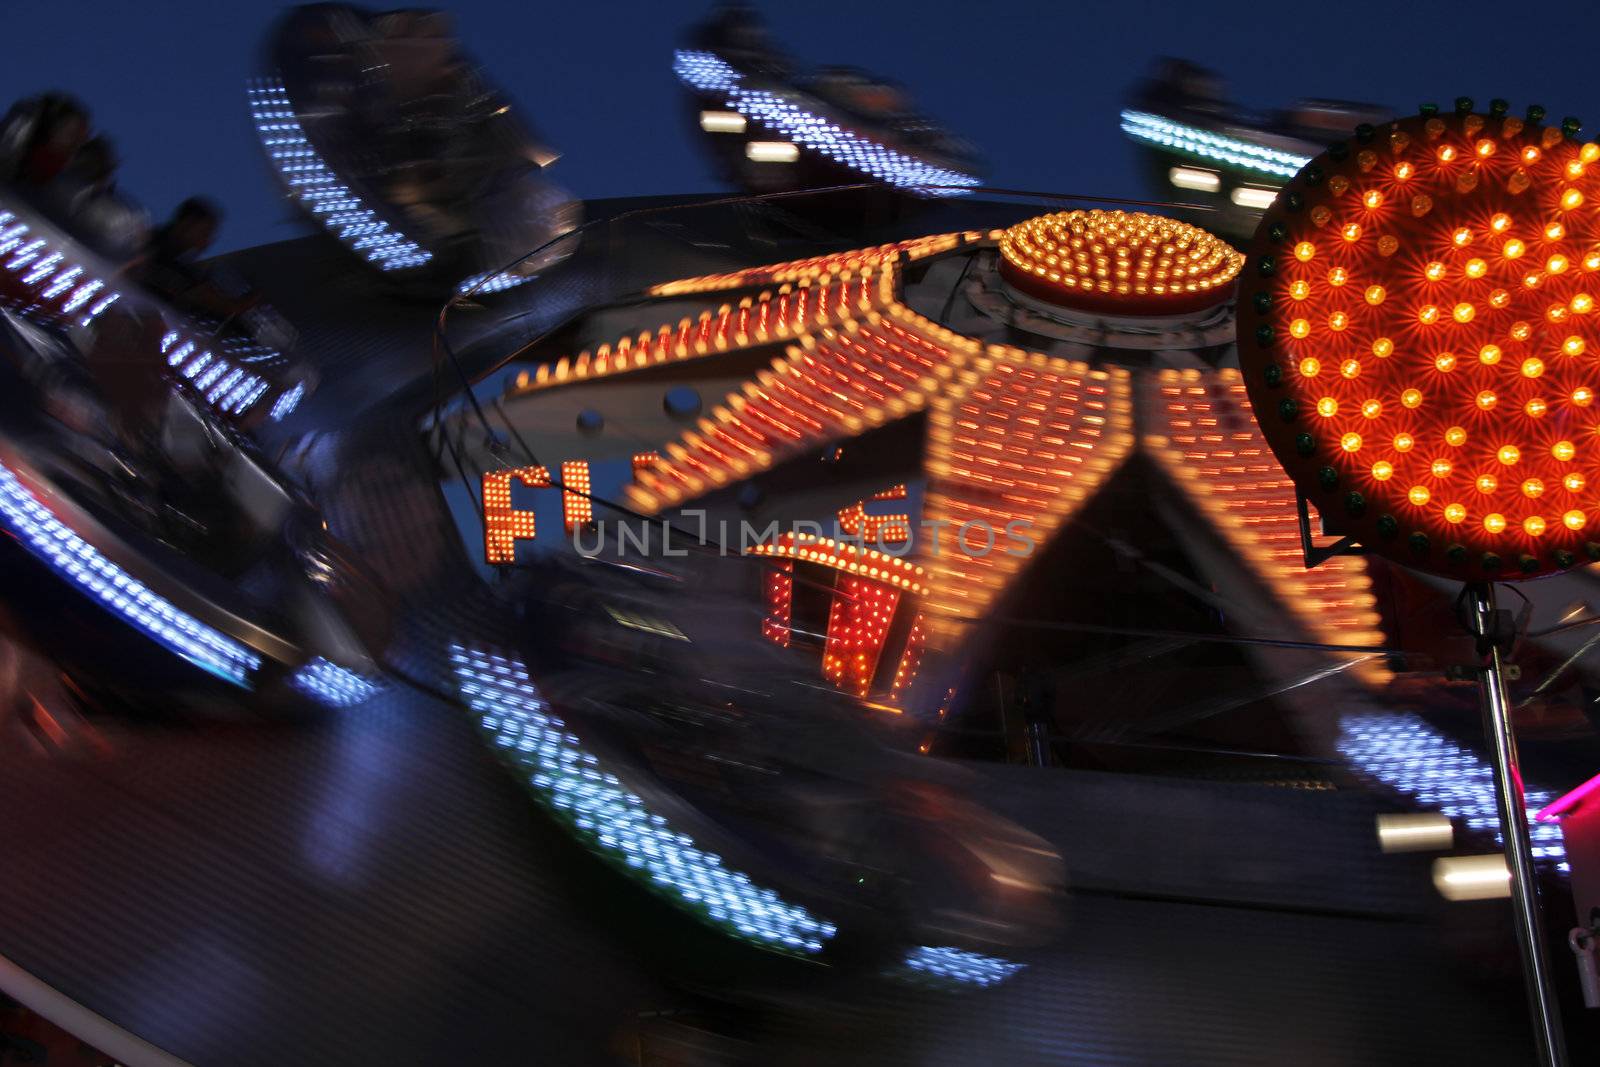 bright colored and fast motion carousel at night